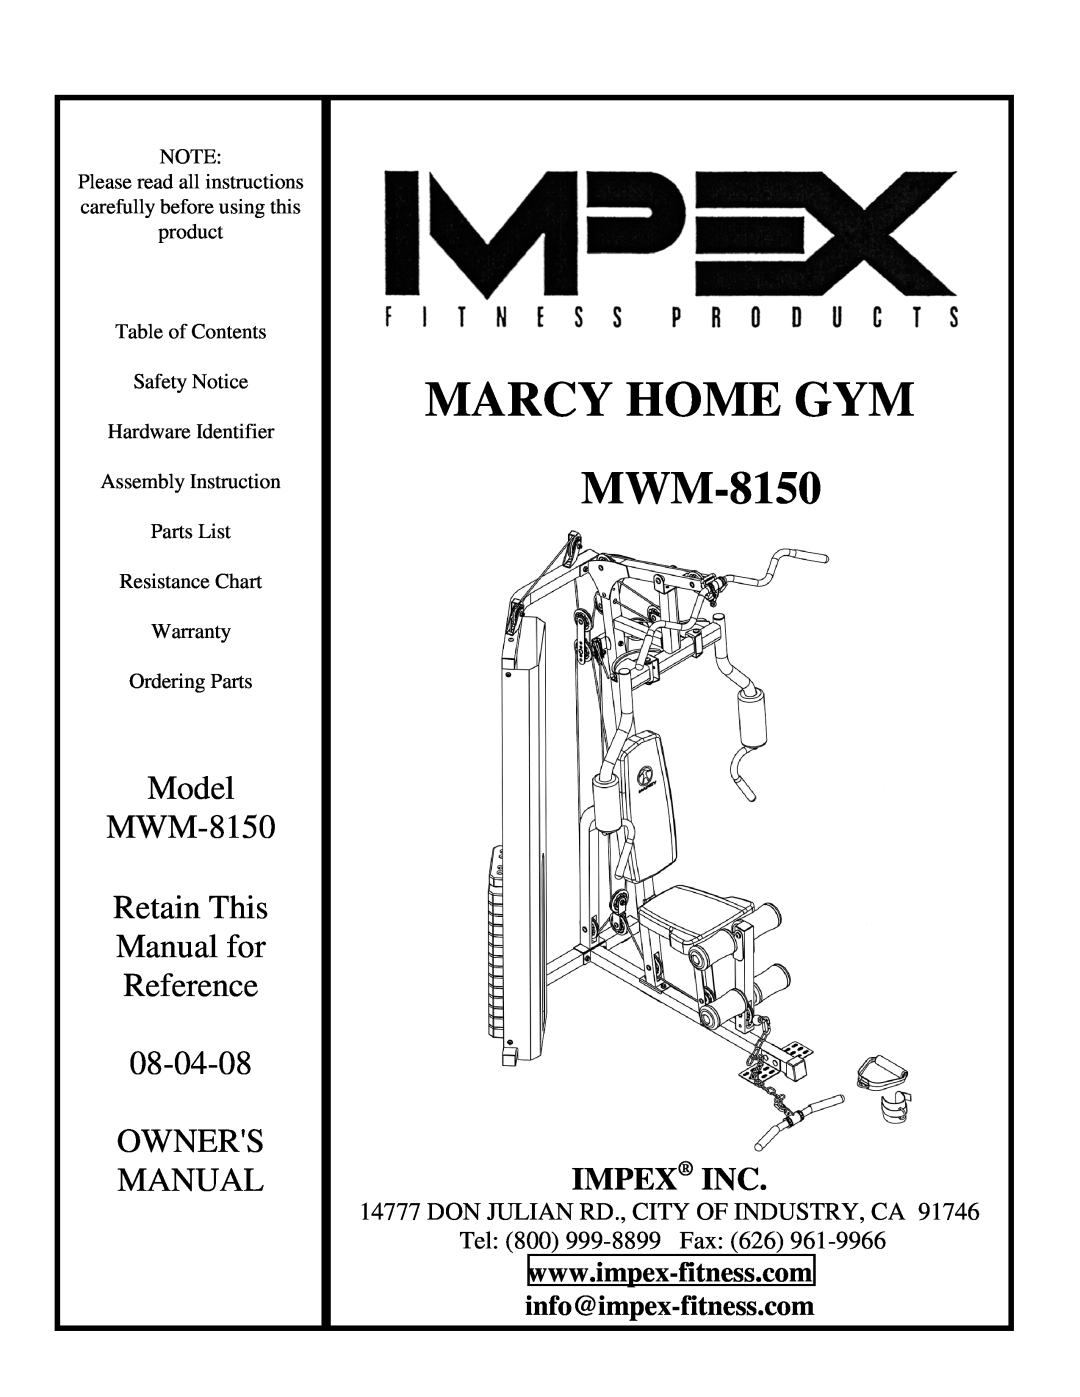 Impex MWM-8150 manual info@impex-fitness.com, Marcy Home Gym, Model, Retain This, Manual for, Reference, Owners, 08-04-08 